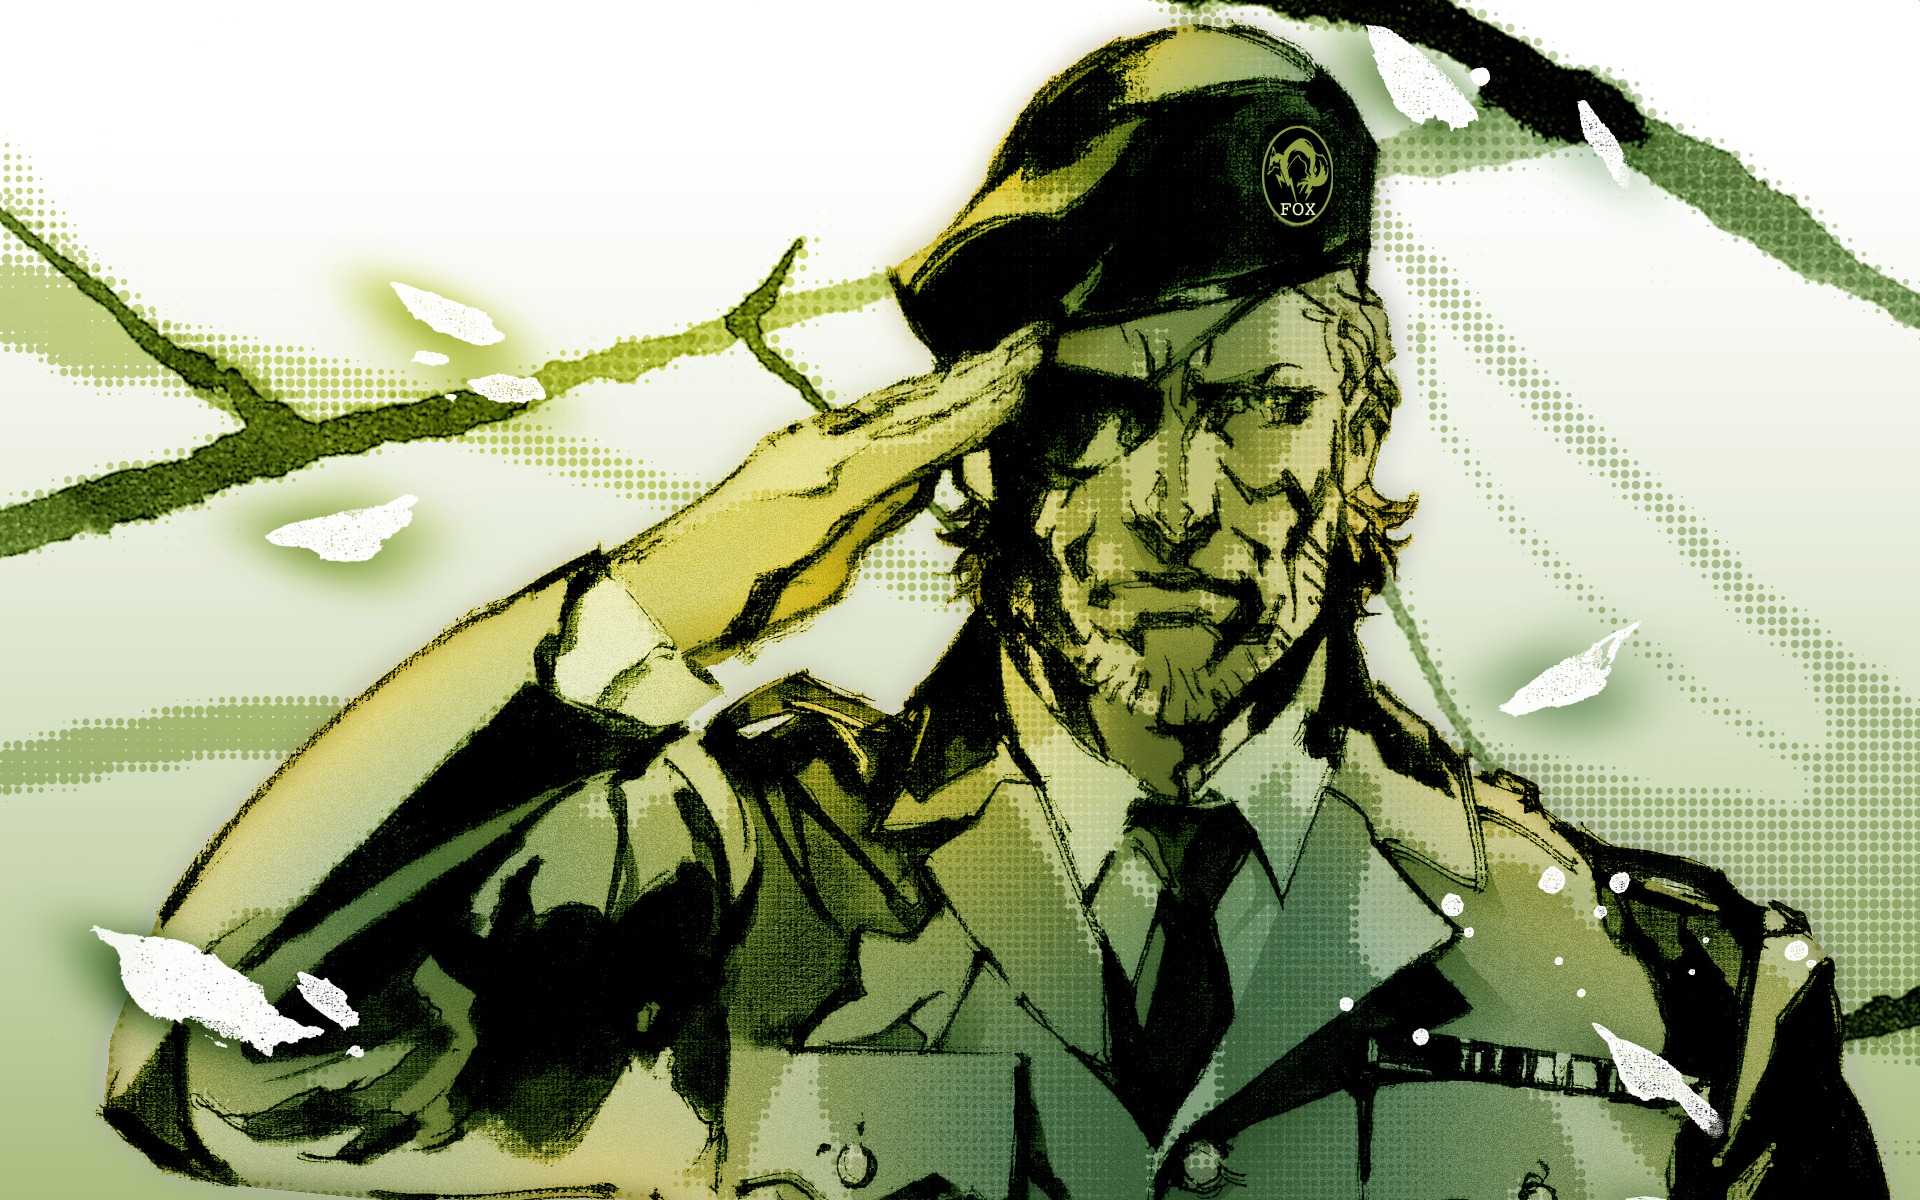 Does anyone have any good metal gear wallpapers metalgearsolid